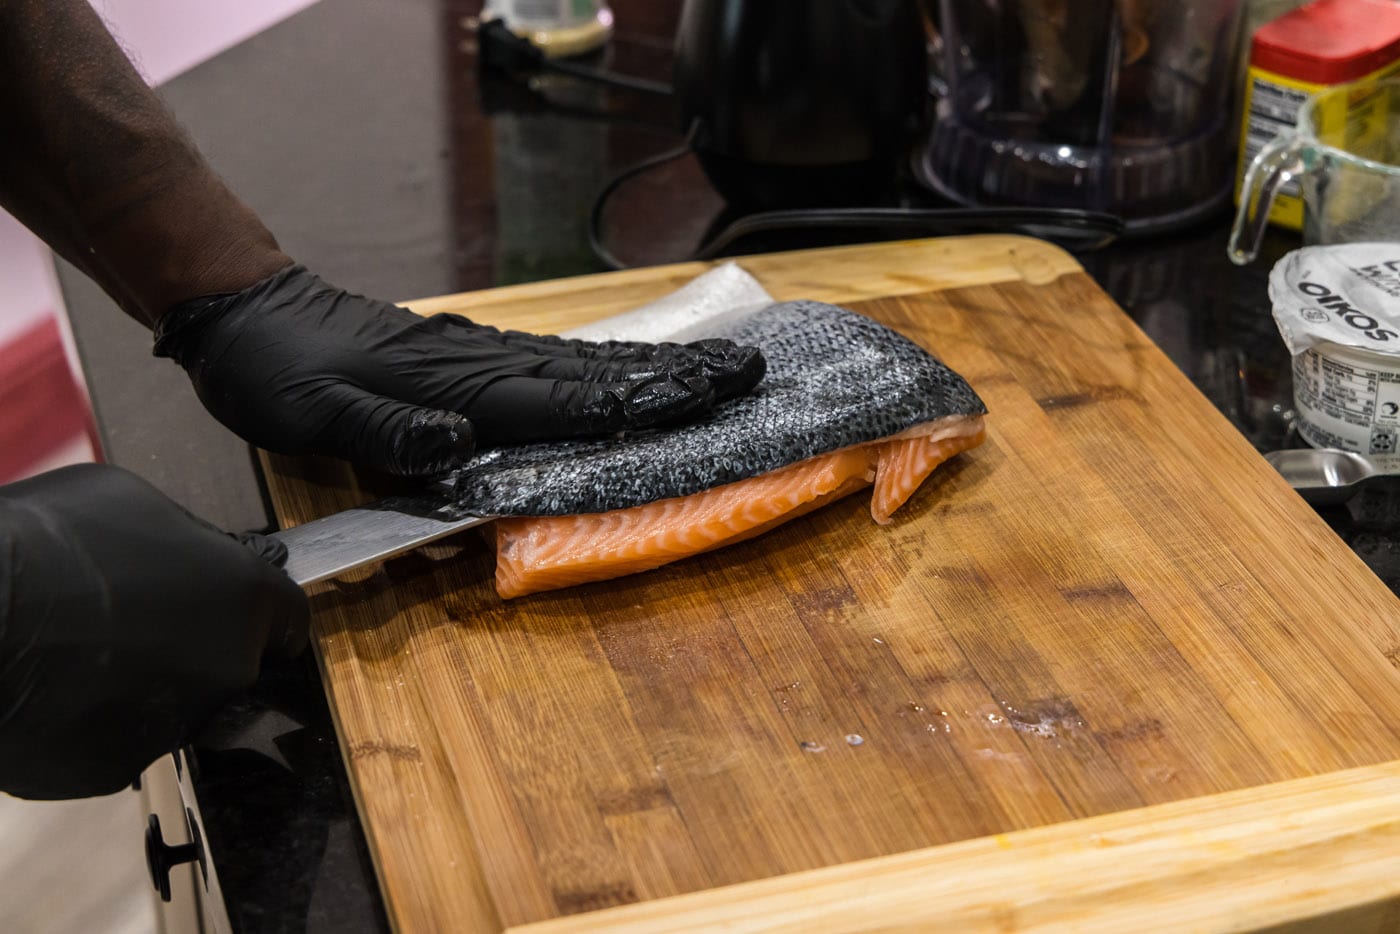 removing skin from salmon with a chef knife